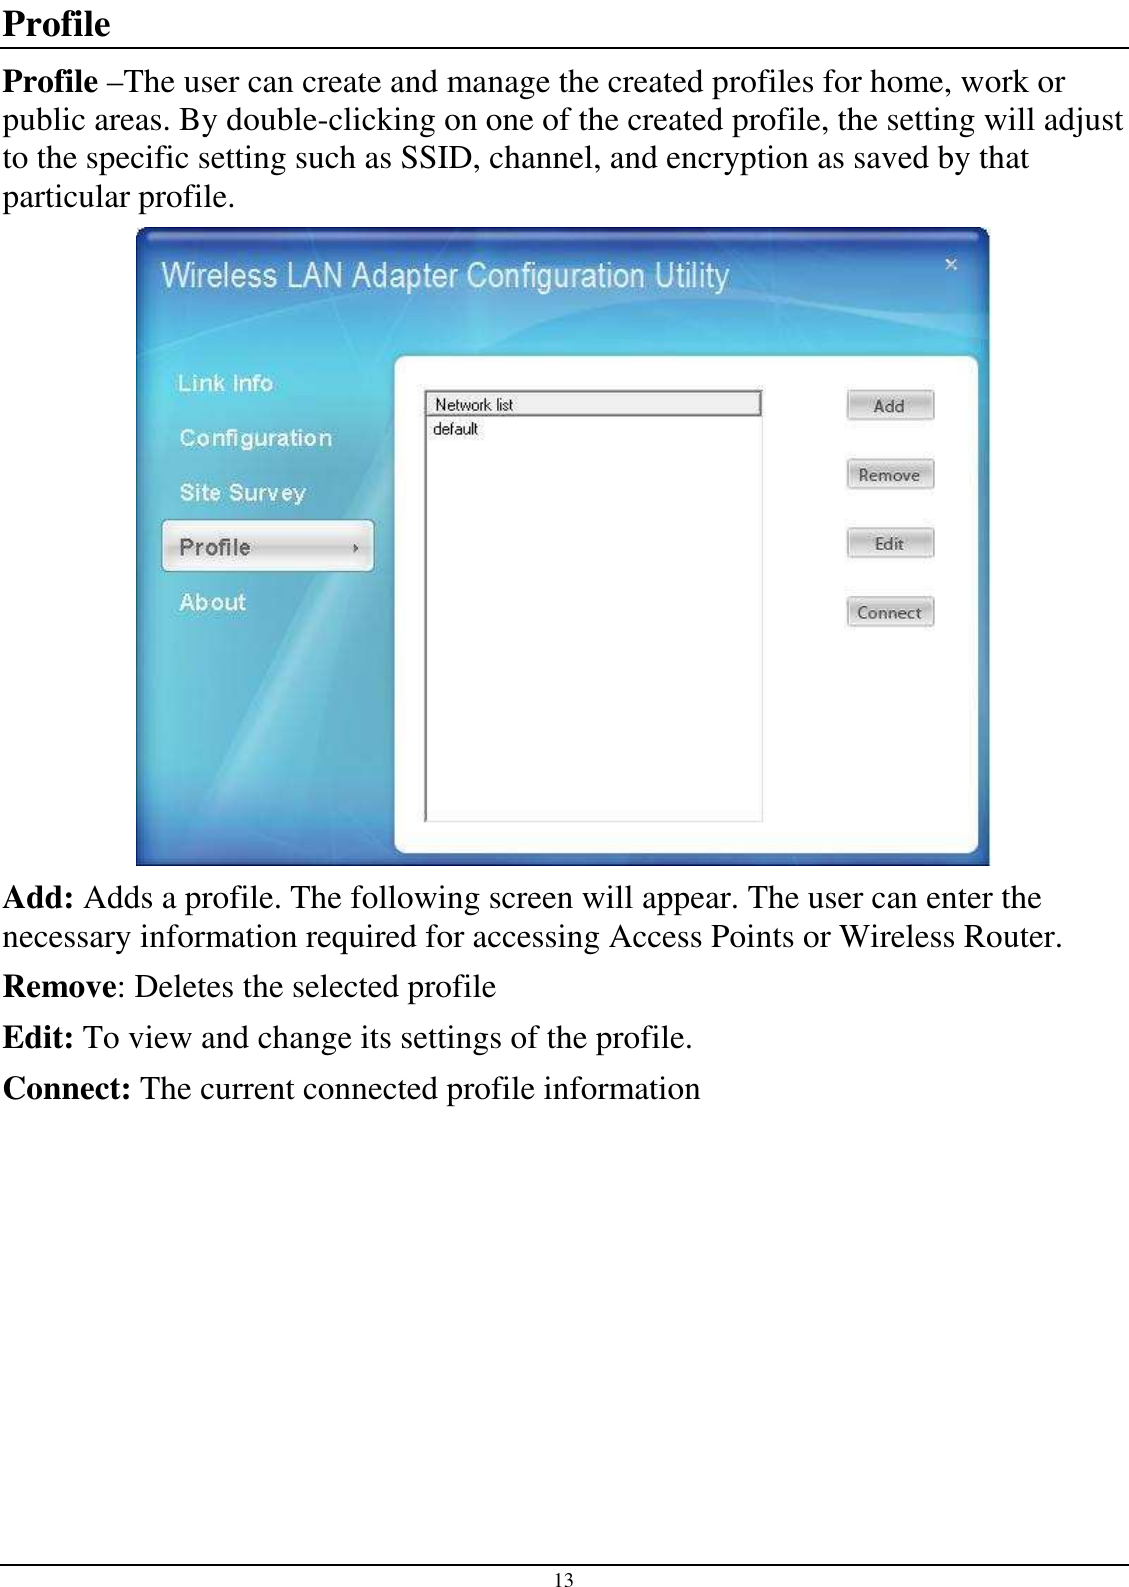 13 Profile Profile –The user can create and manage the created profiles for home, work or public areas. By double-clicking on one of the created profile, the setting will adjust to the specific setting such as SSID, channel, and encryption as saved by that particular profile.  Add: Adds a profile. The following screen will appear. The user can enter the necessary information required for accessing Access Points or Wireless Router. Remove: Deletes the selected profile Edit: To view and change its settings of the profile. Connect: The current connected profile information   